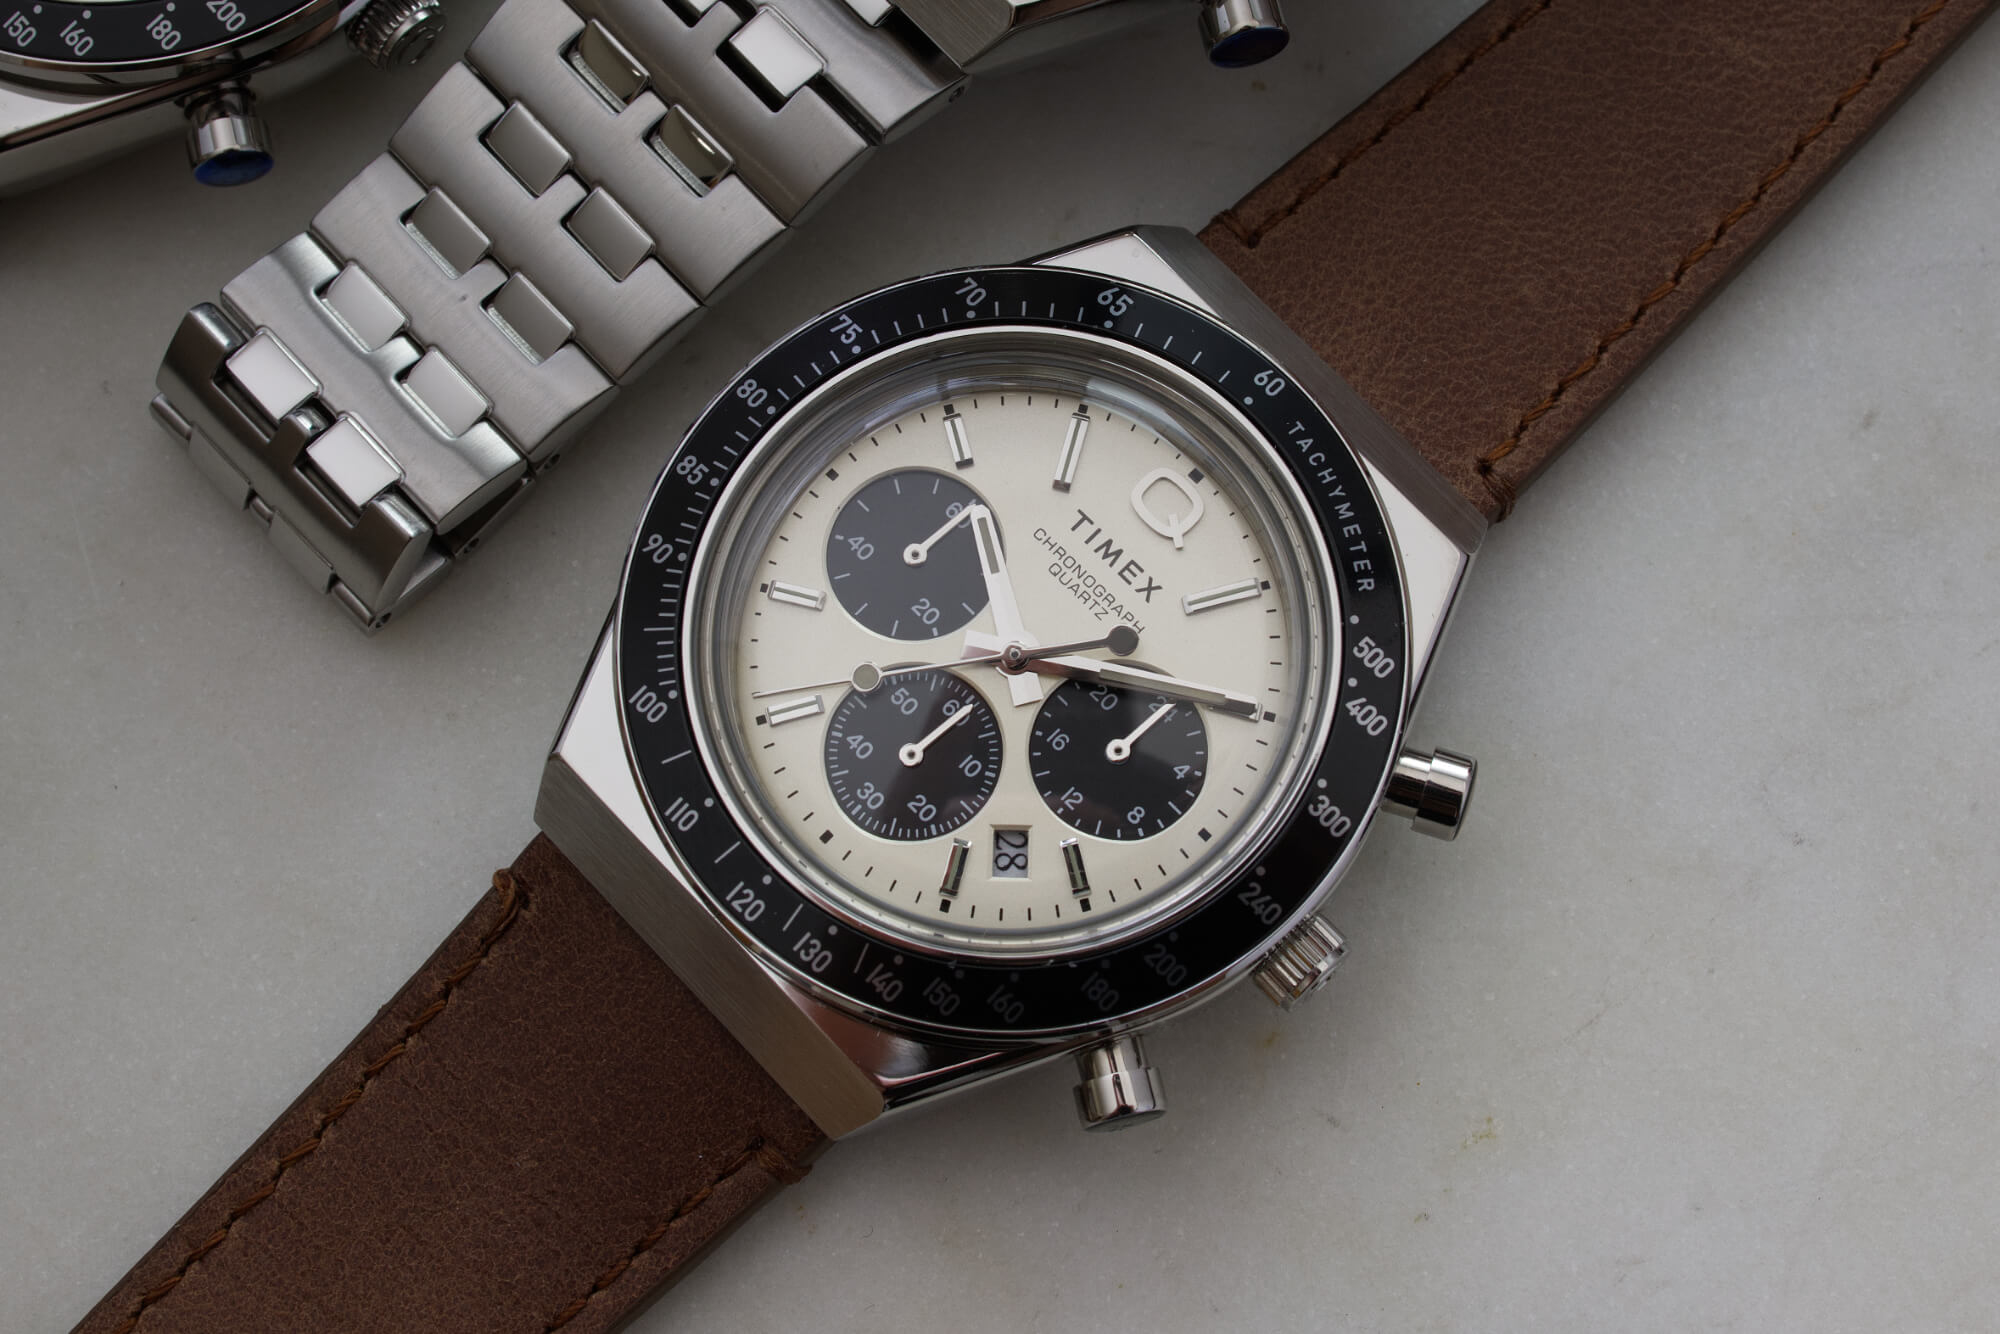 The Timex Q Timex Chronograph Watch Is The Q You've Been Waiting For |  aBlogtoWatch